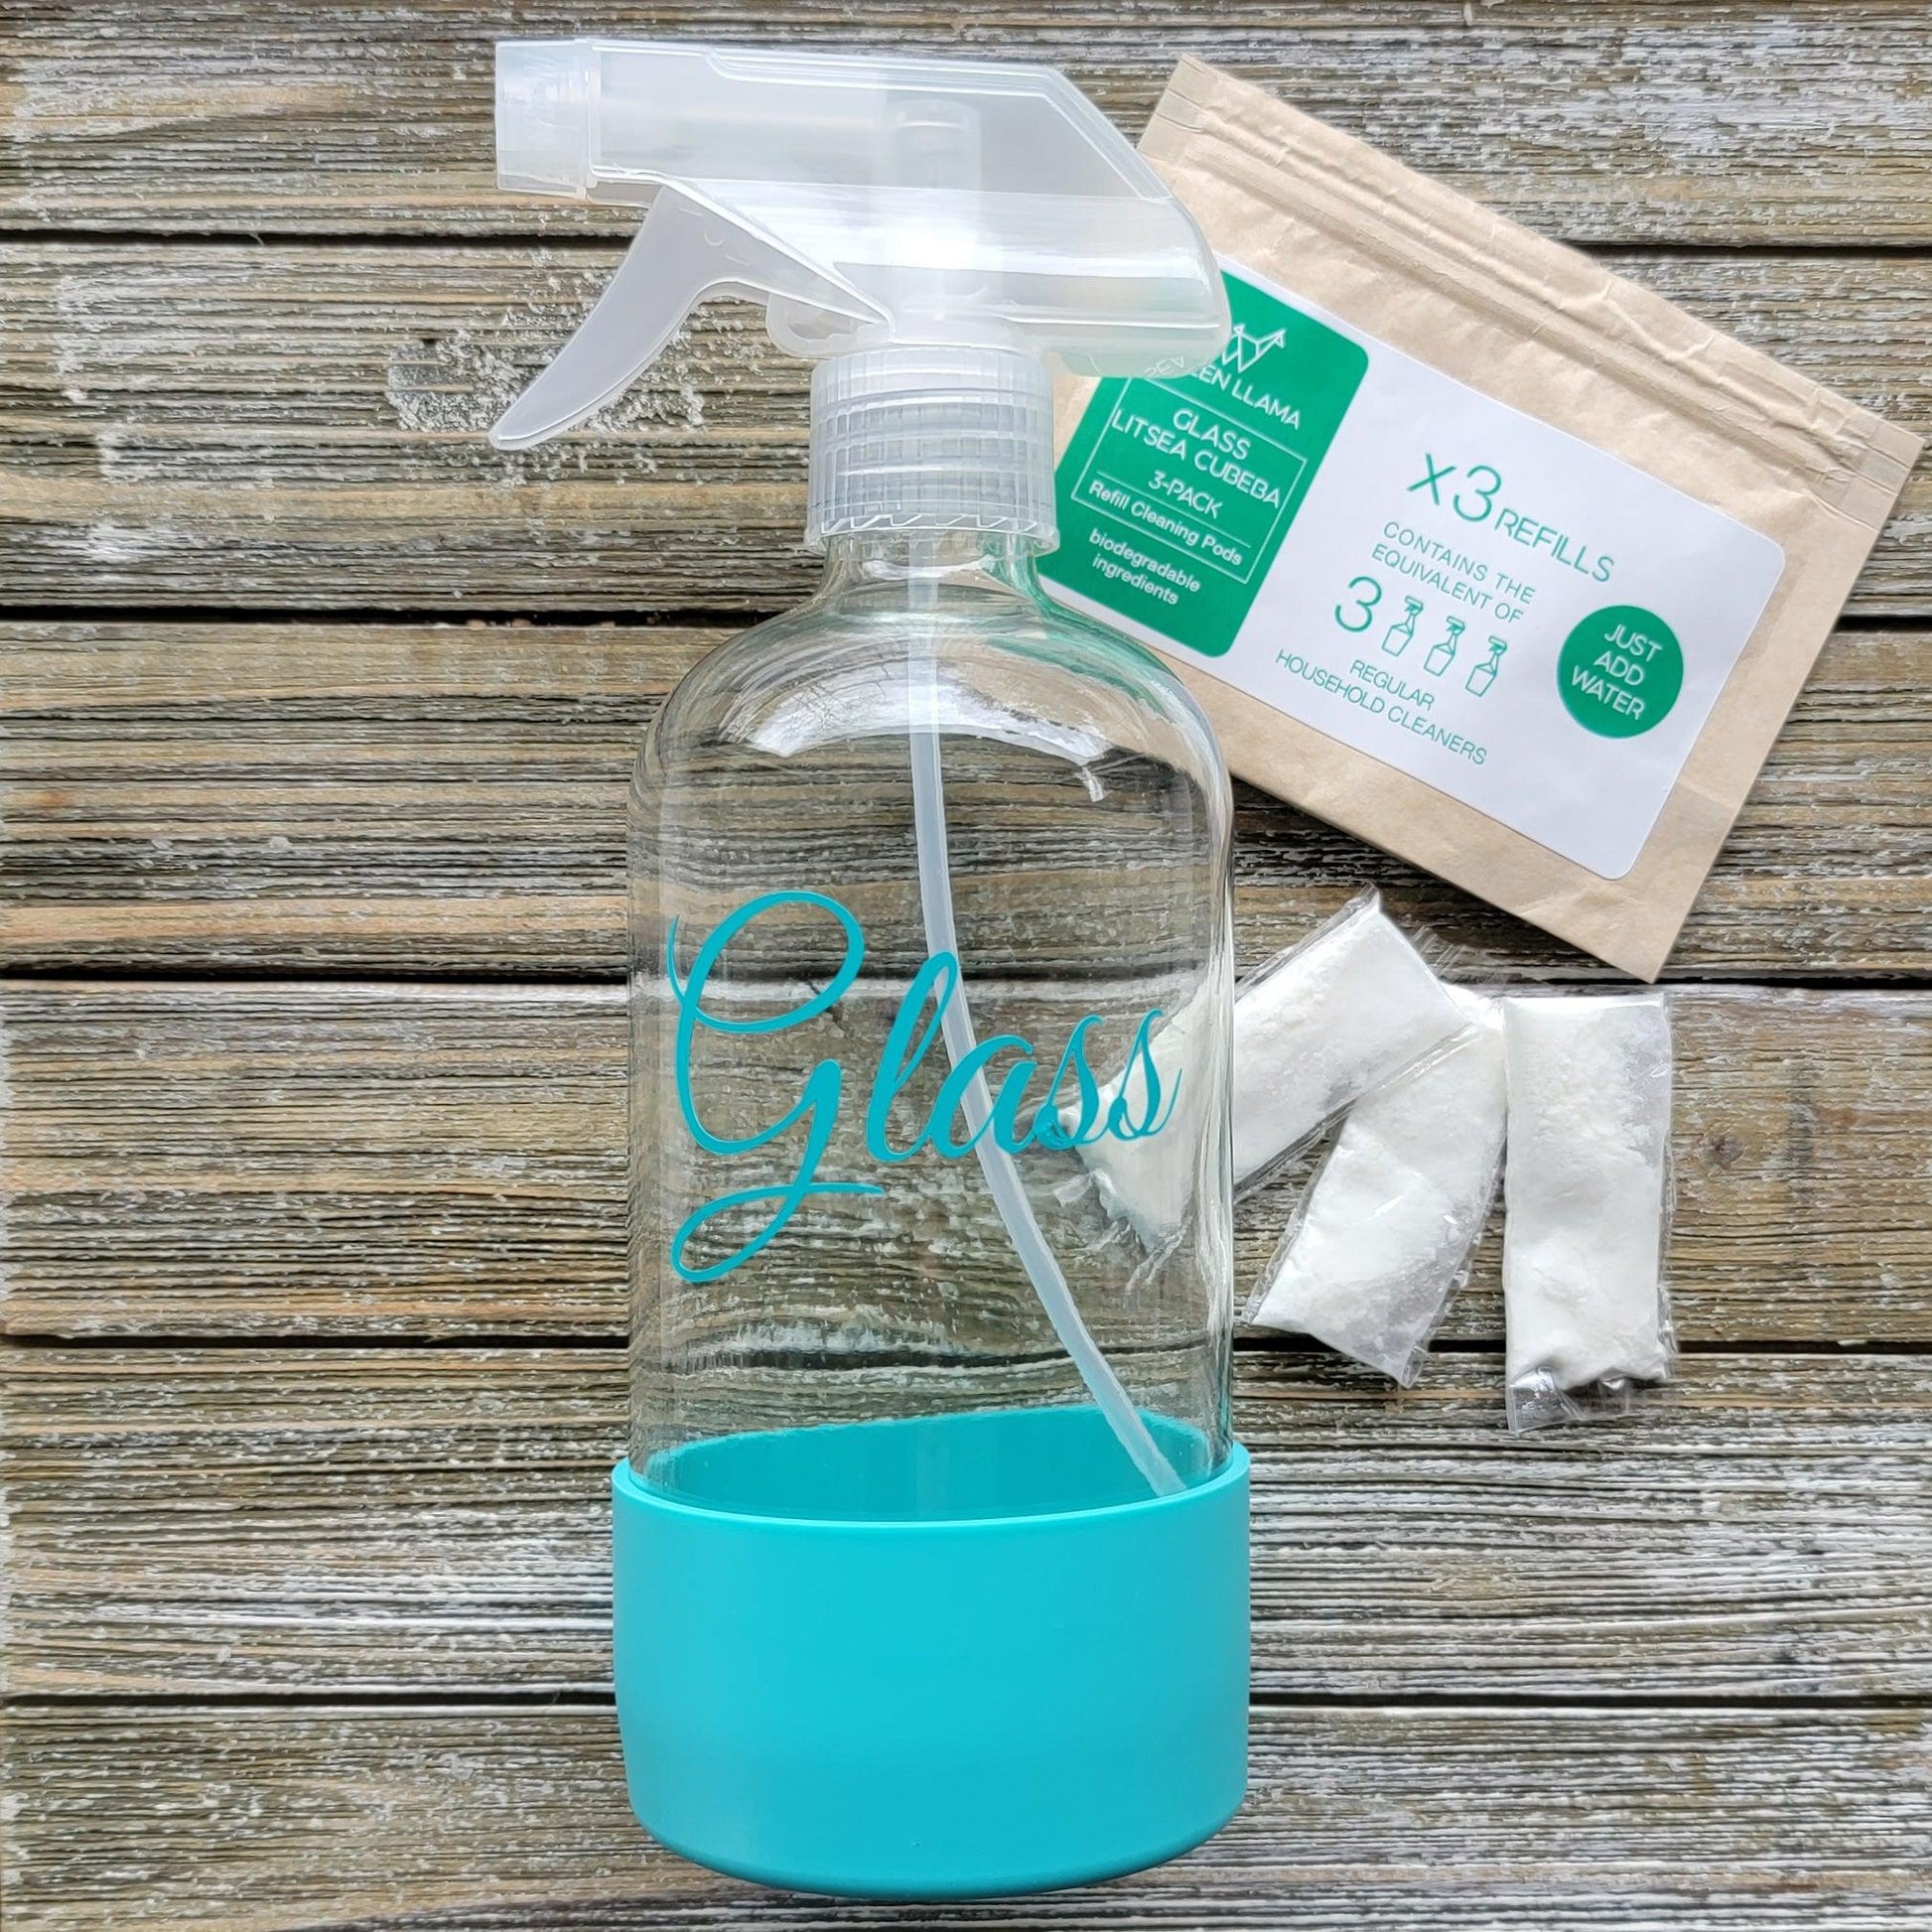 Glass Cleaner - Choice of Starter Set or Refill-Home & Lifestyle-Perfectly Natural Soap